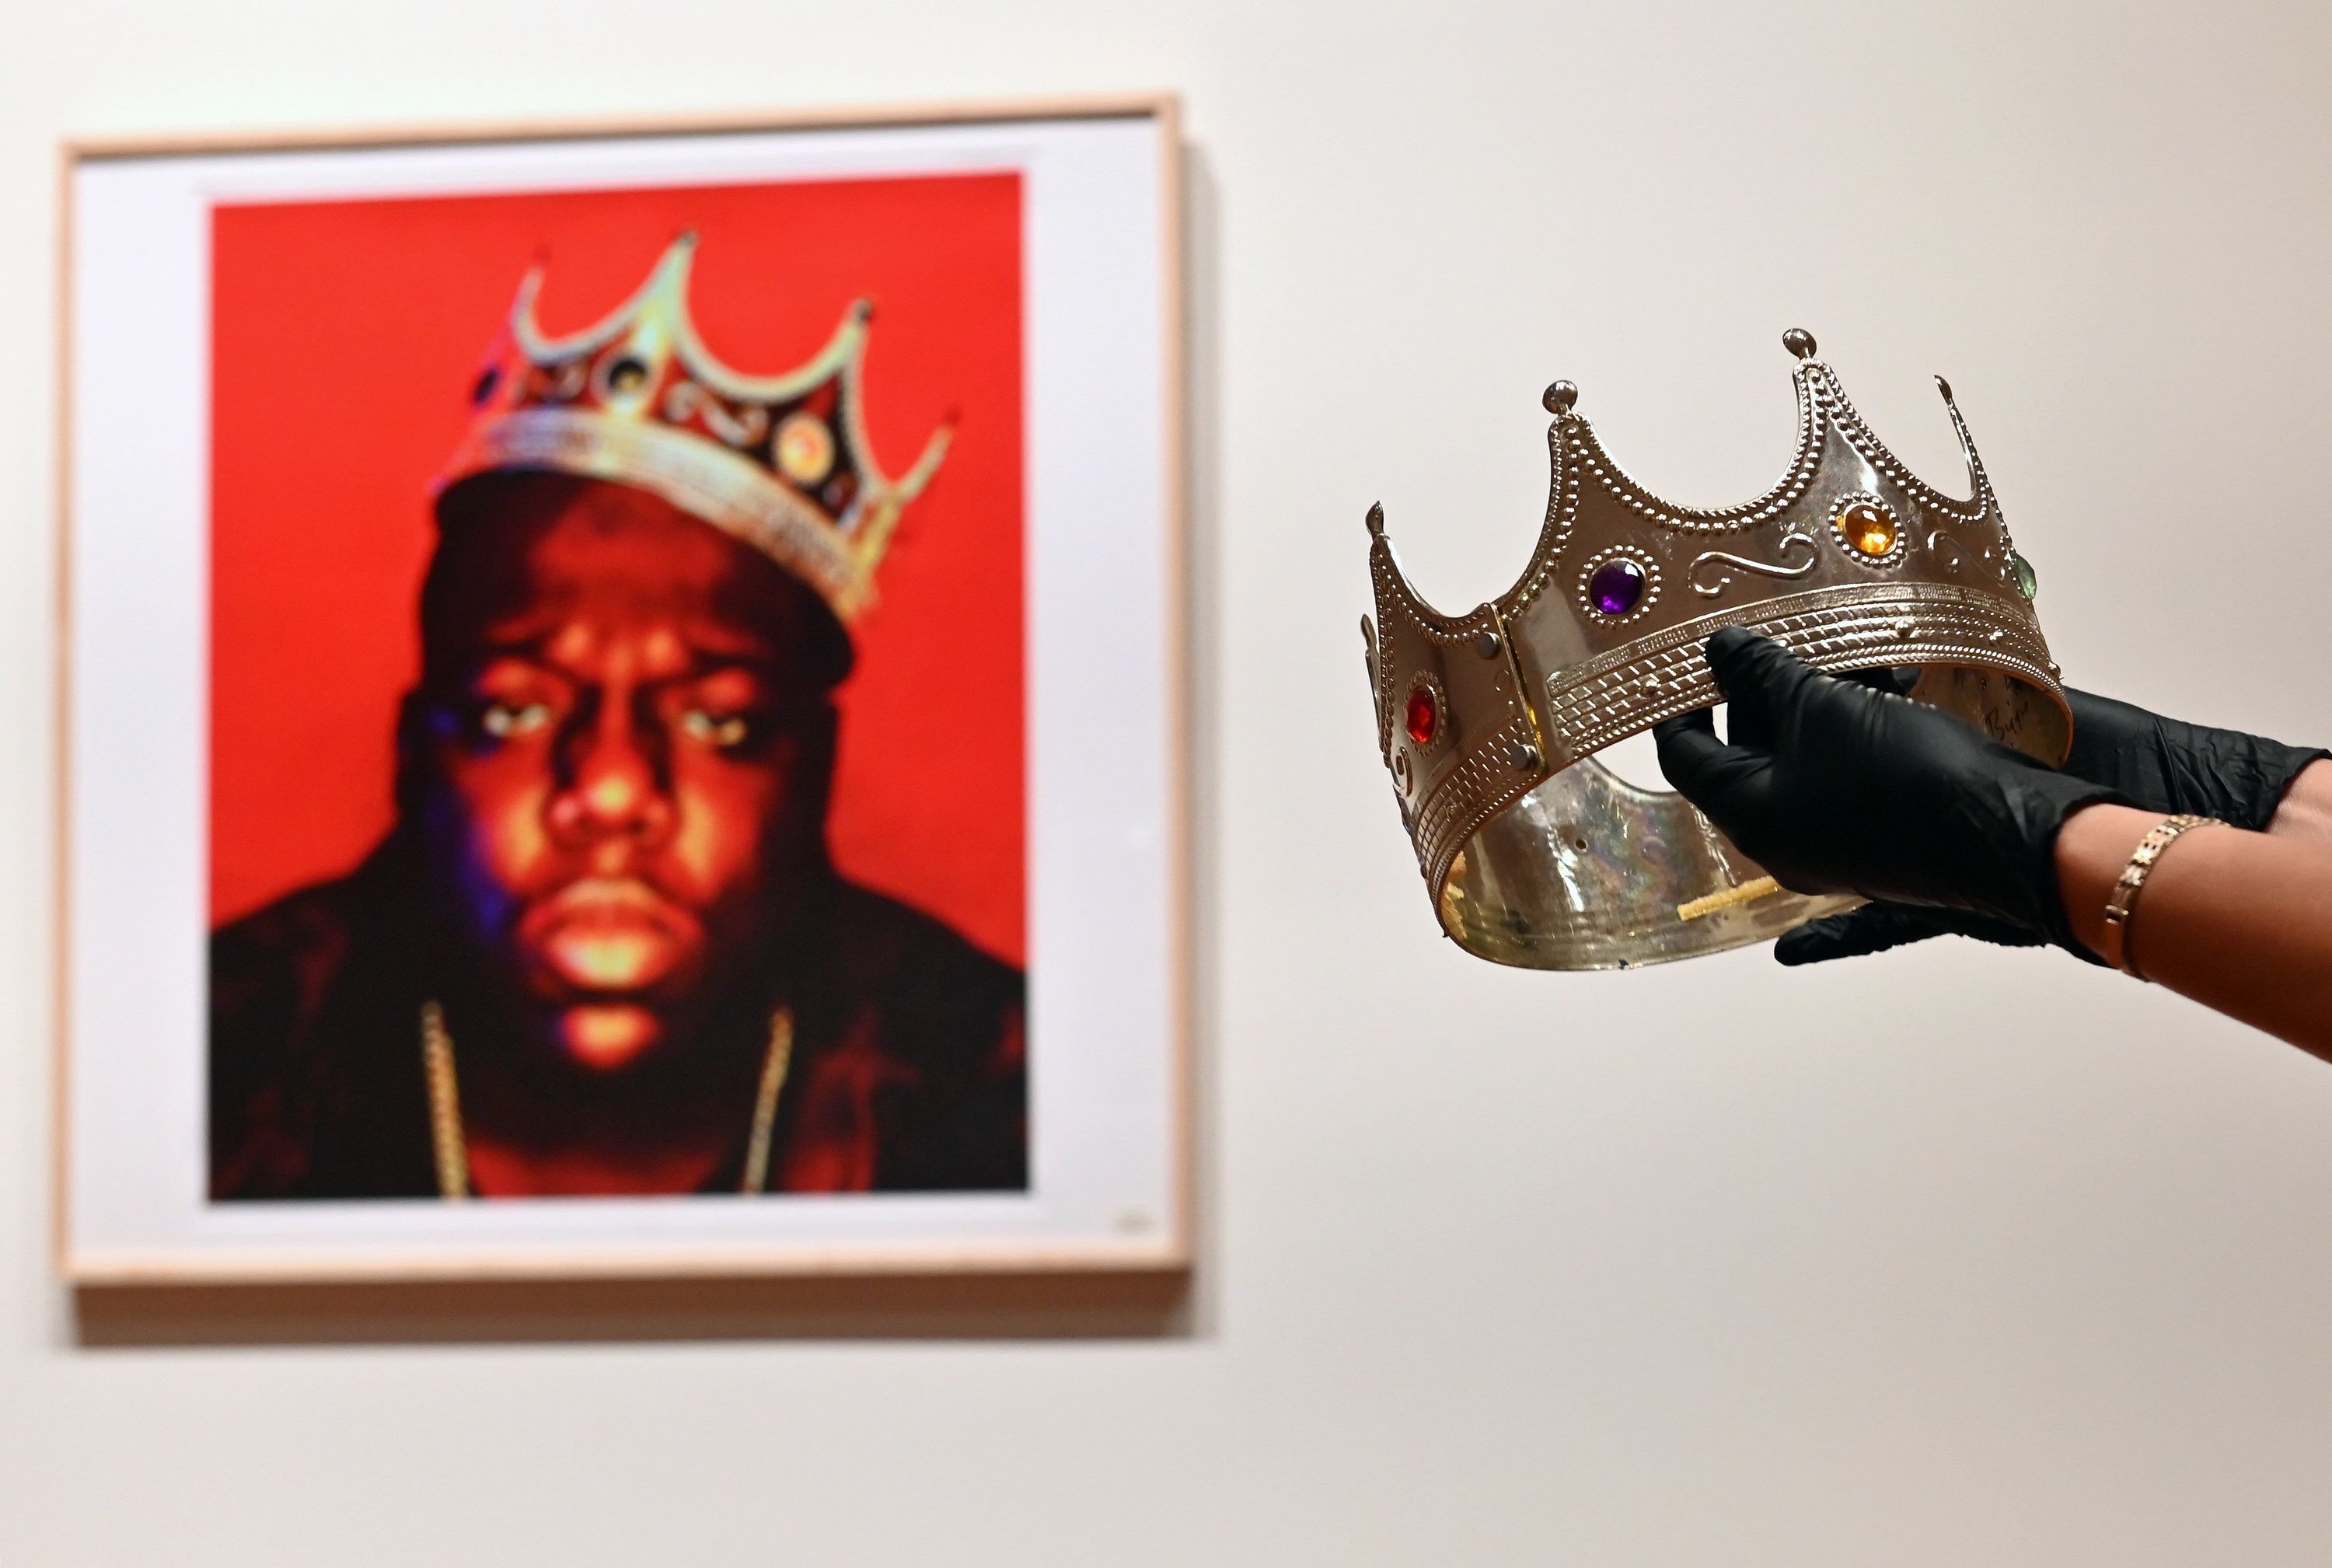 gloved hands hold out a crown toward a photo of Biggie wearing a crown